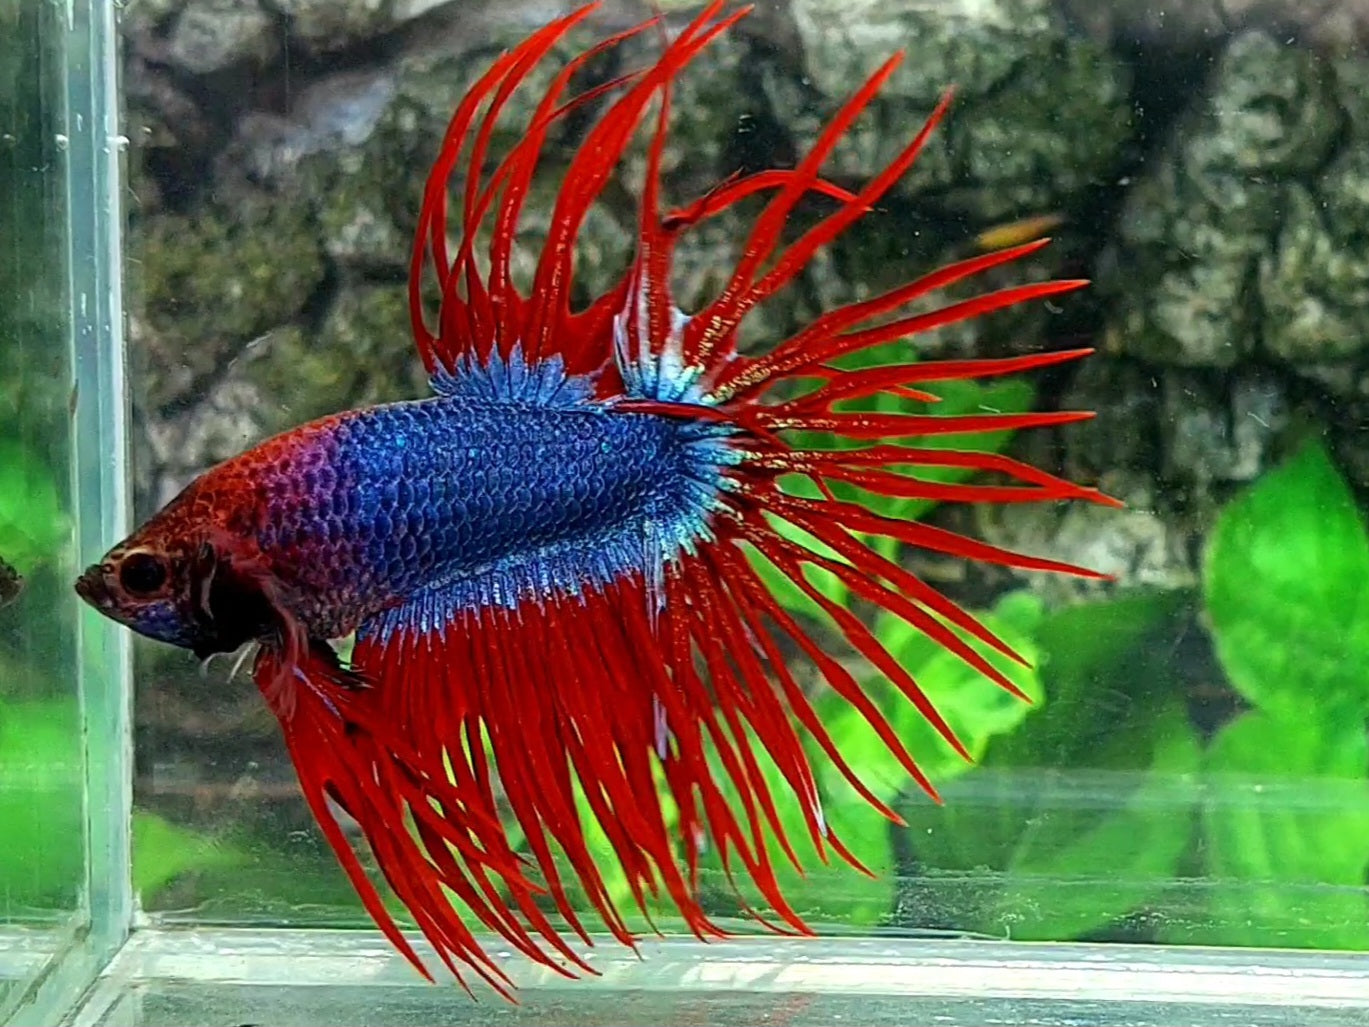 Red Mascot Crowntail Male